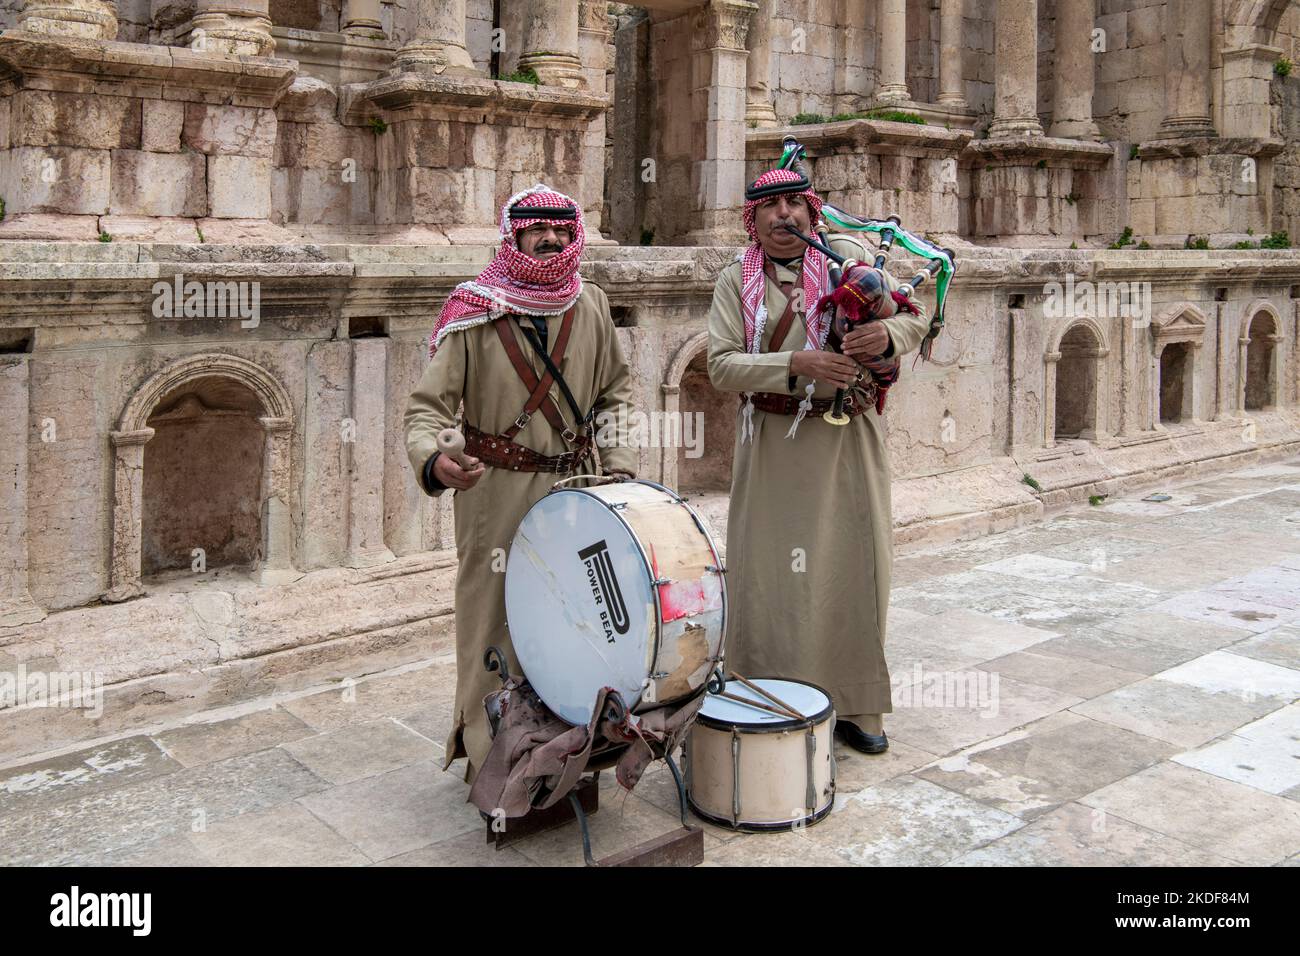 Two men in khaki uniform playing bagpipes and drums South Theatre Jerash Jordan Stock Photo